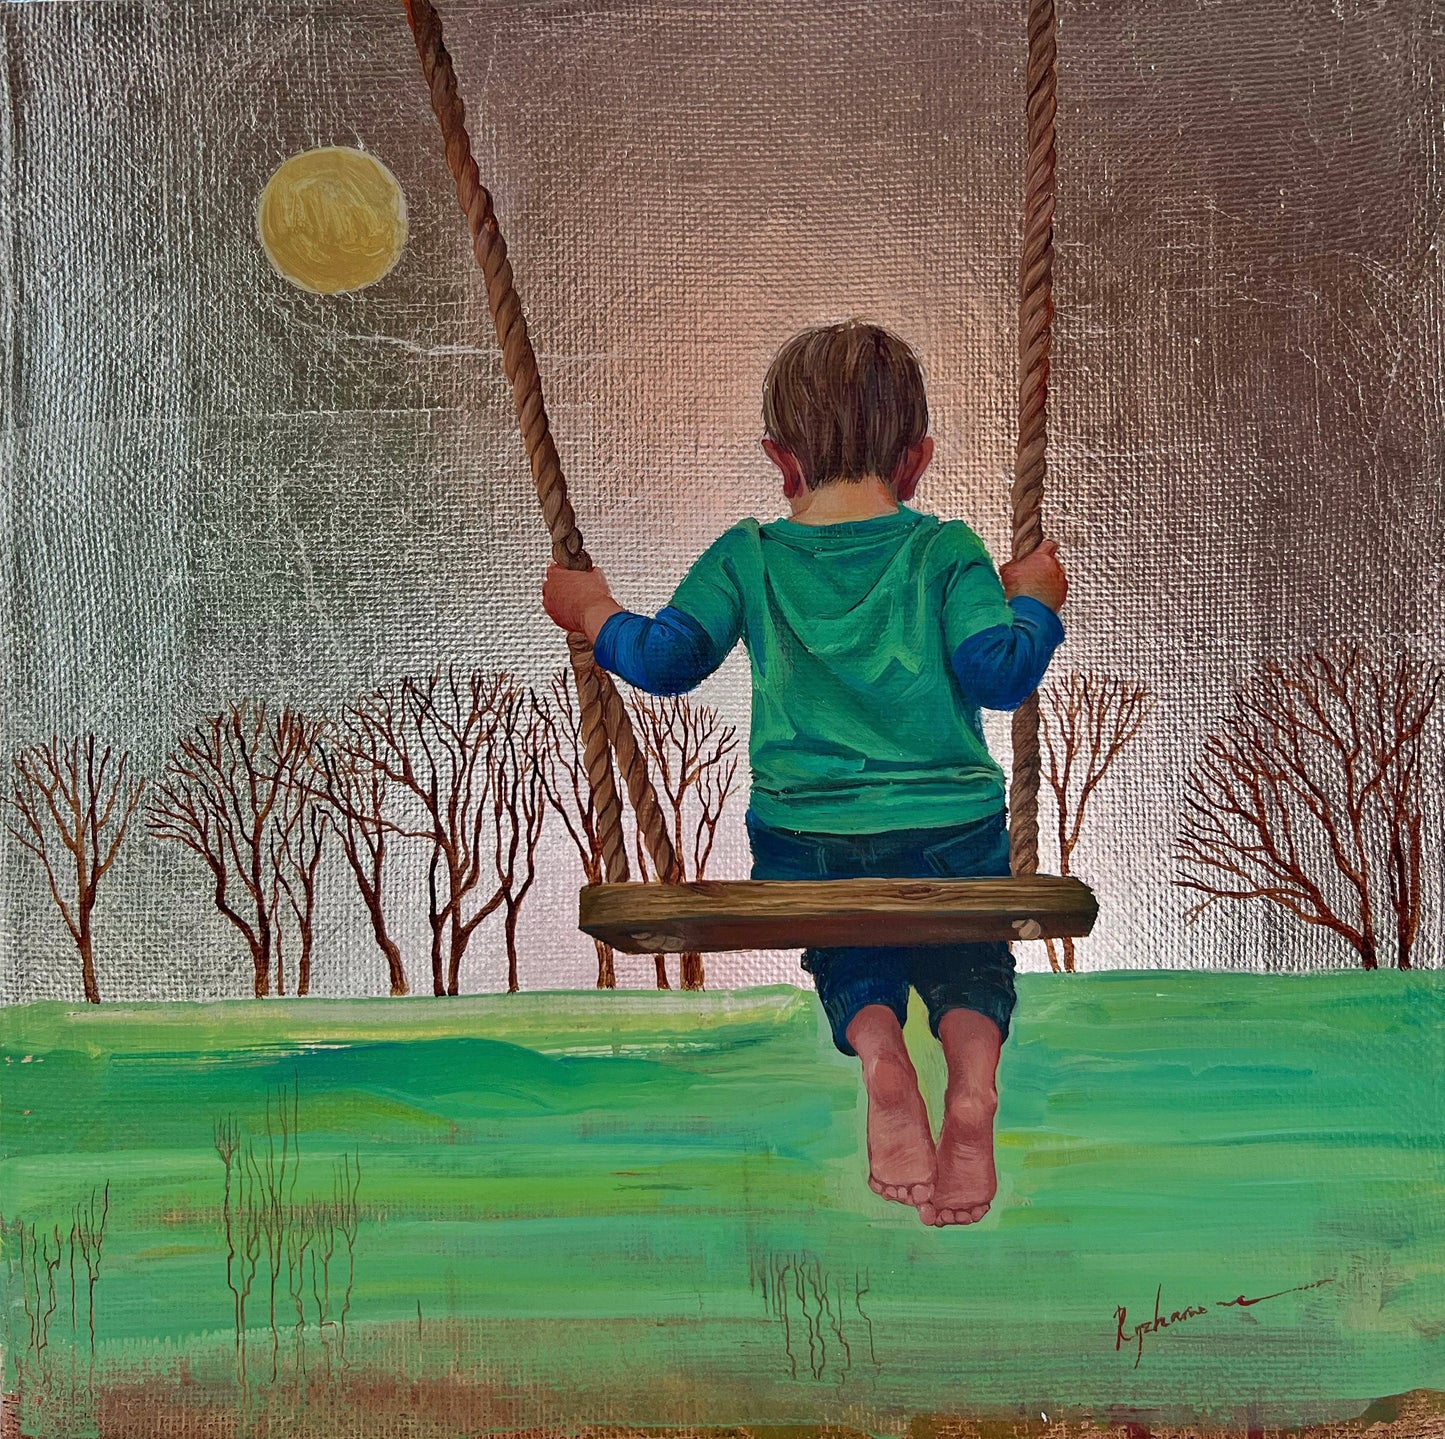 The Swing | 12 x 12 inched